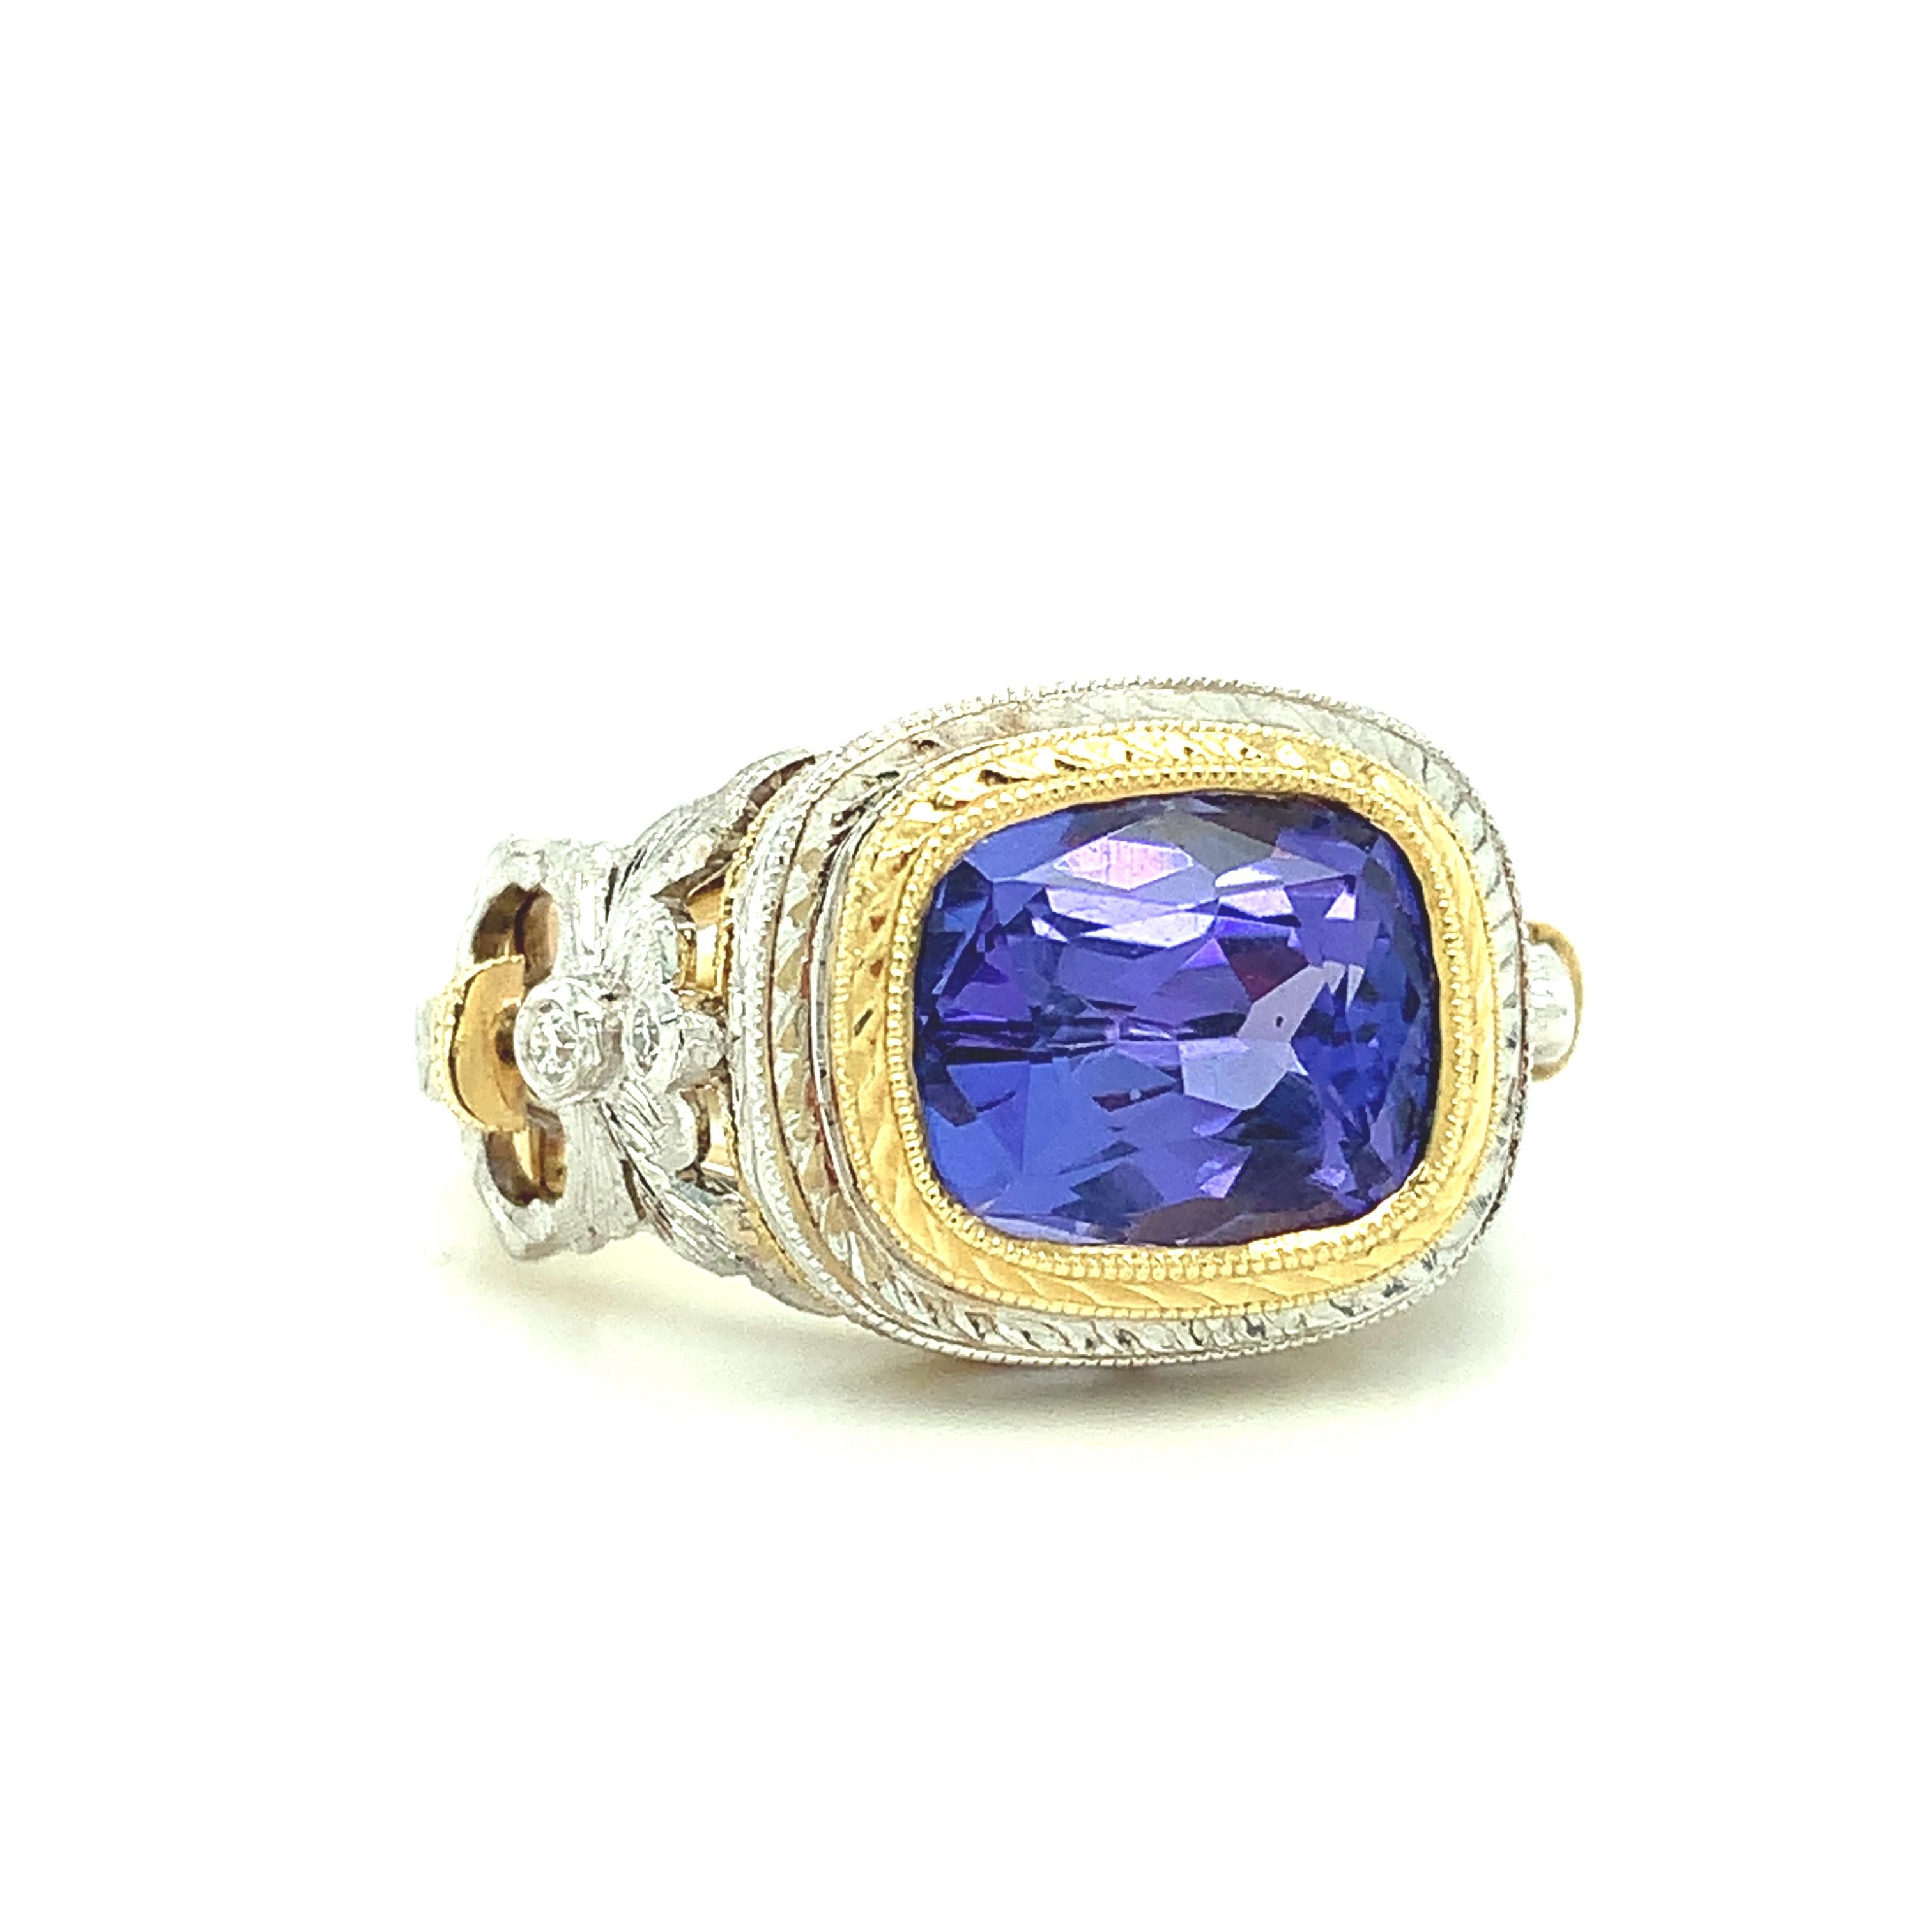 4.04 Carat Tanzanite and Diamond Cocktail Ring, Handmade in 18k Gold In New Condition For Sale In Los Angeles, CA